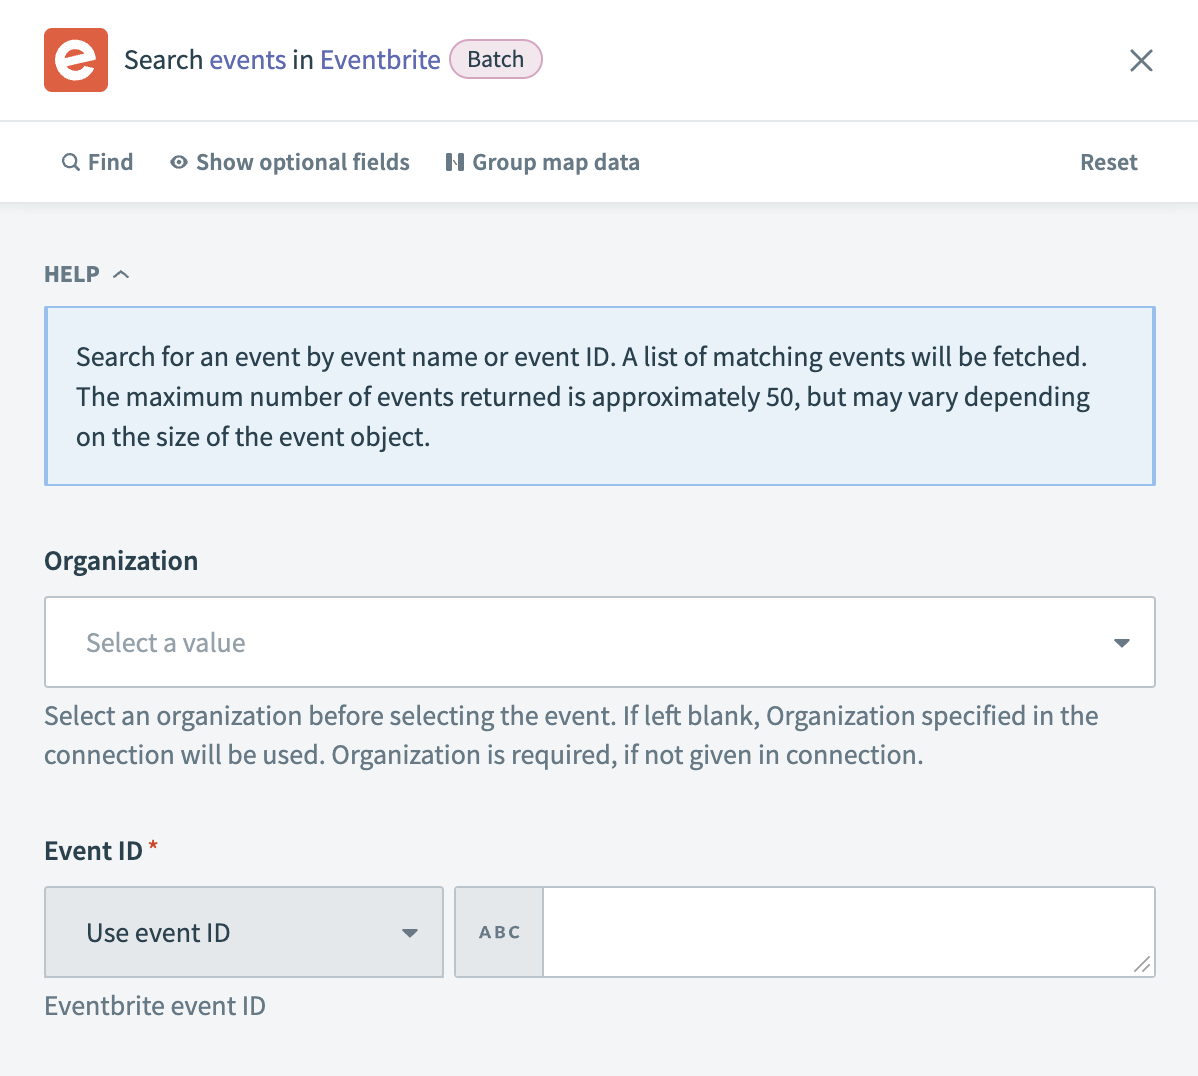 Search events action